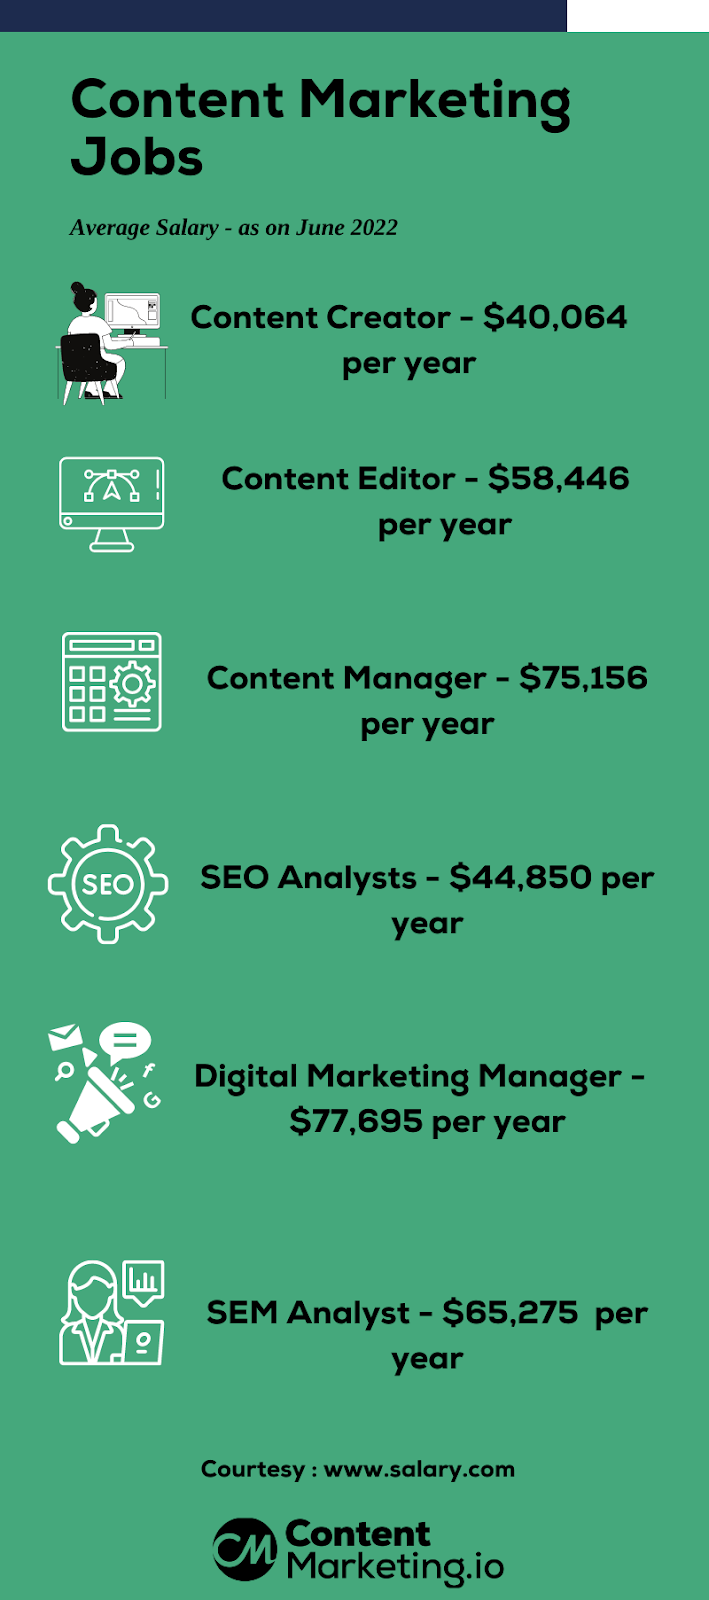 Content Marketing Jobs - Average salary for various posts